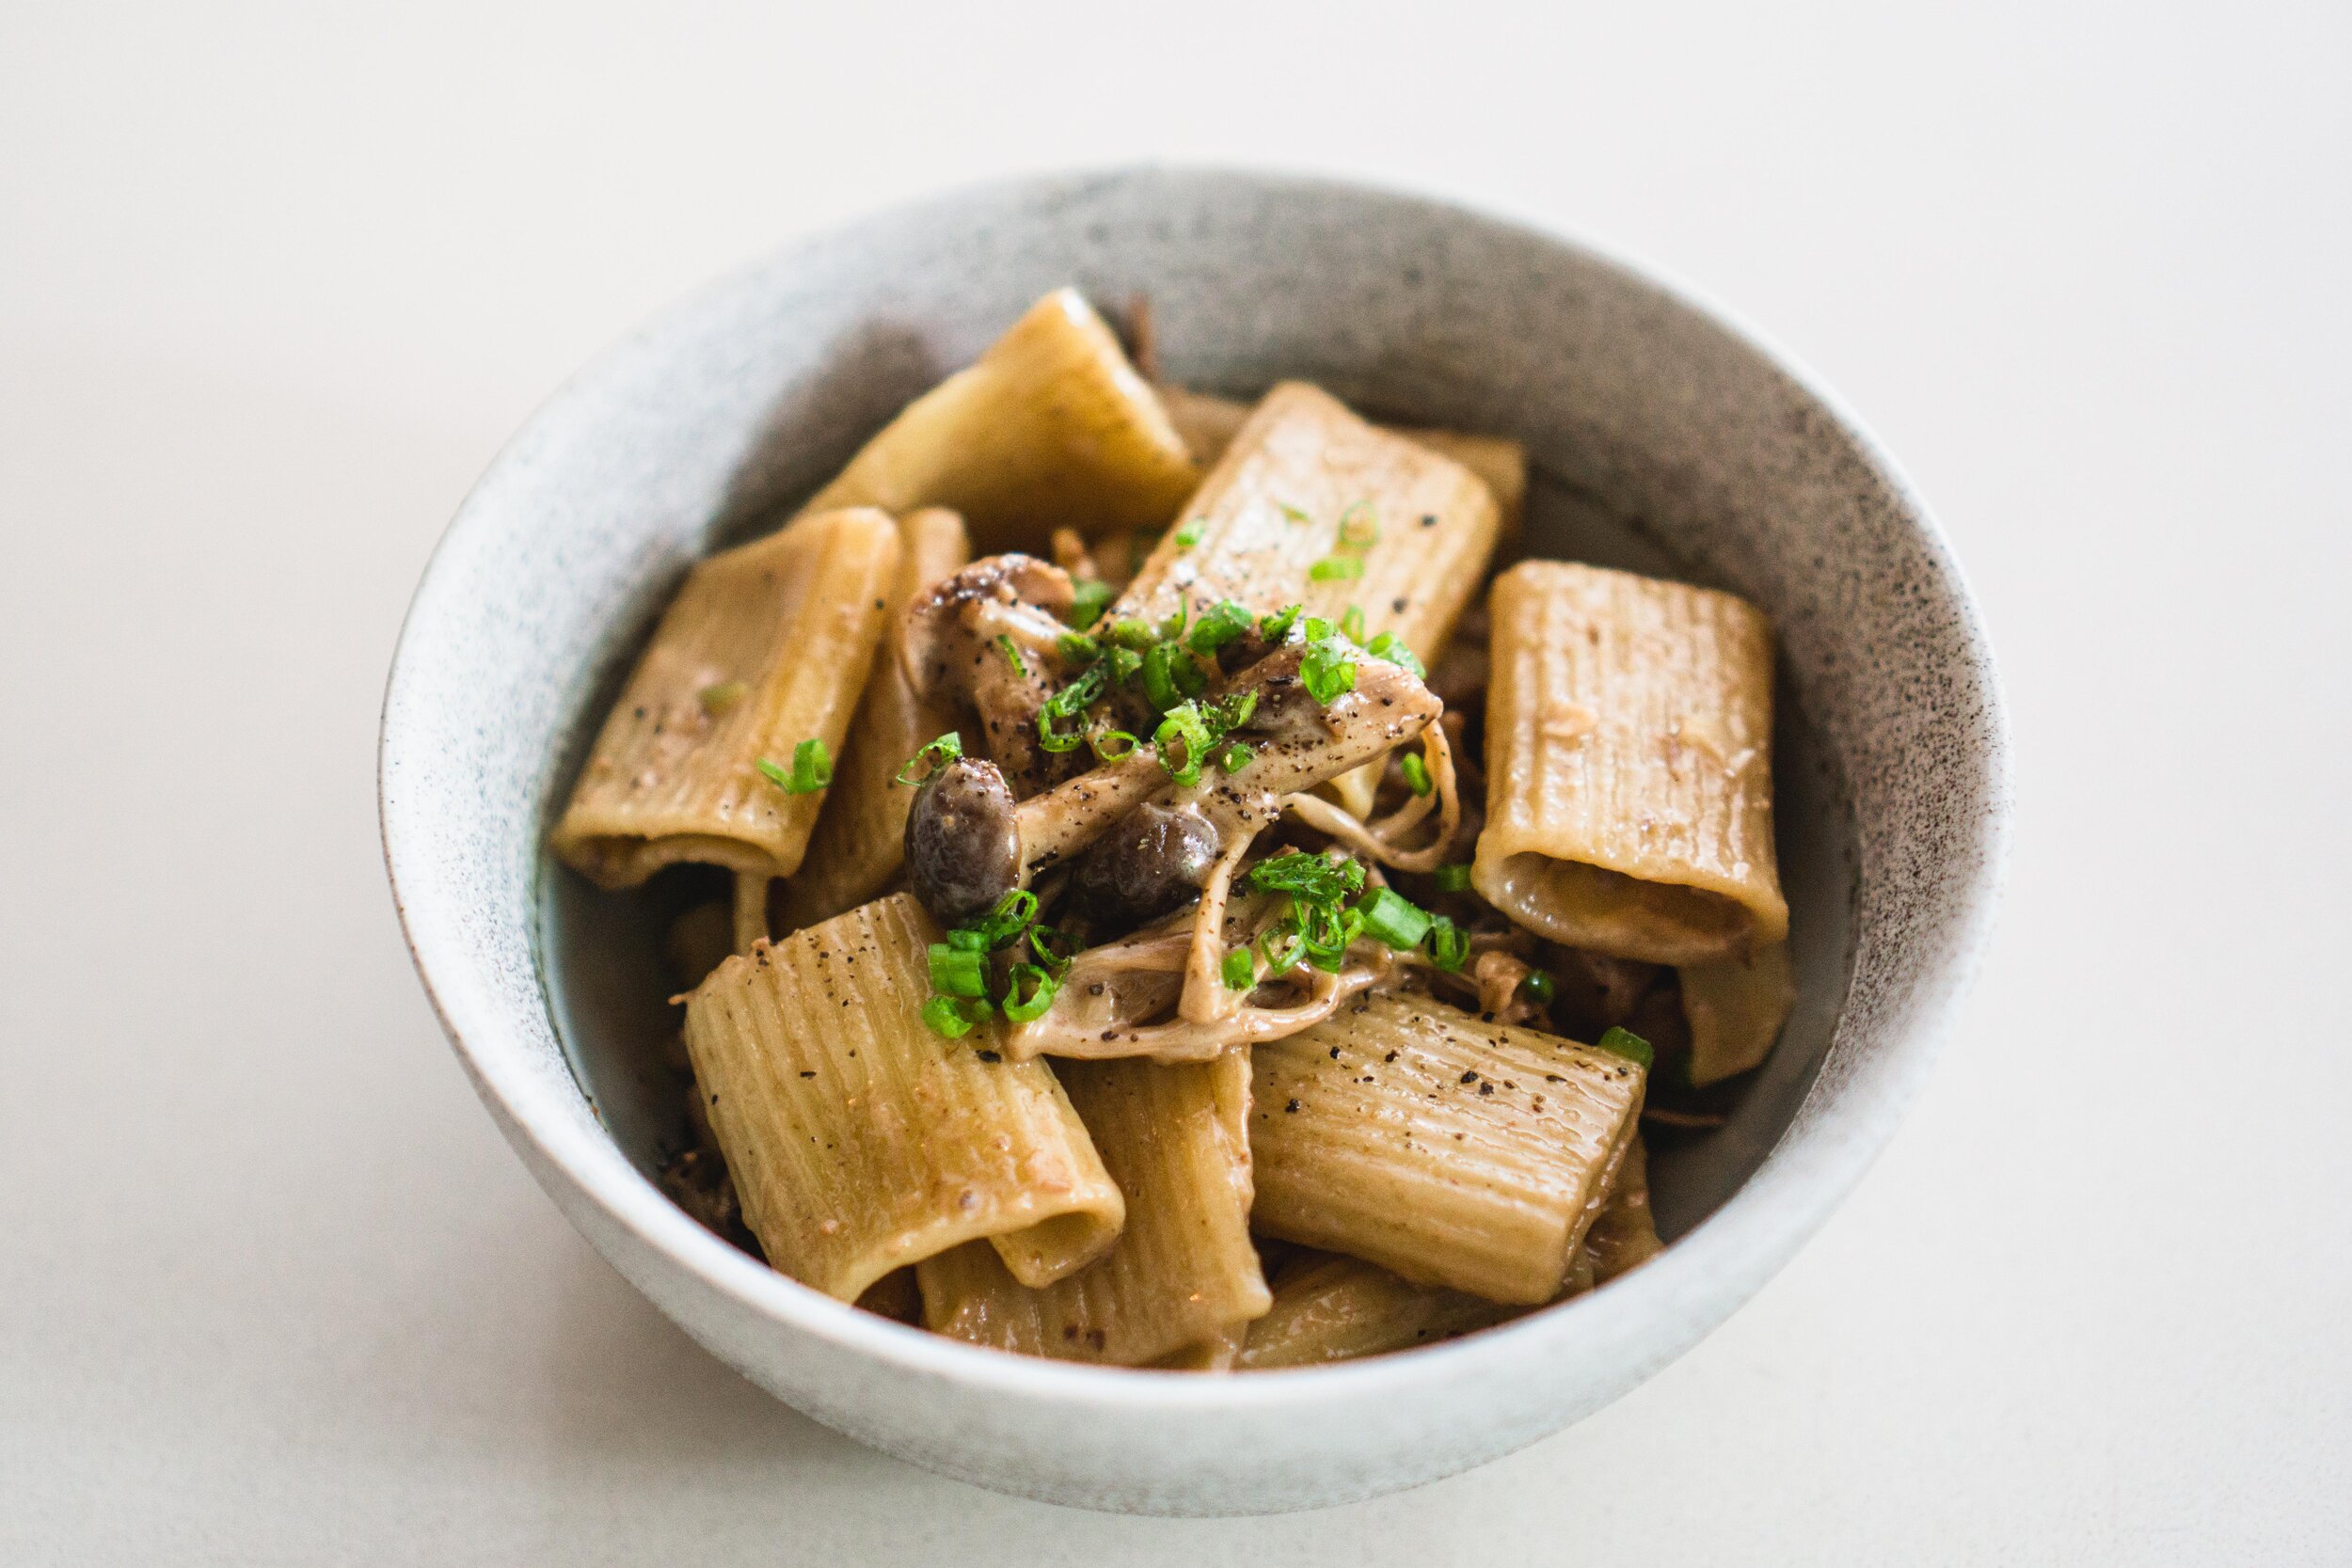 How to Make Miso Pasta